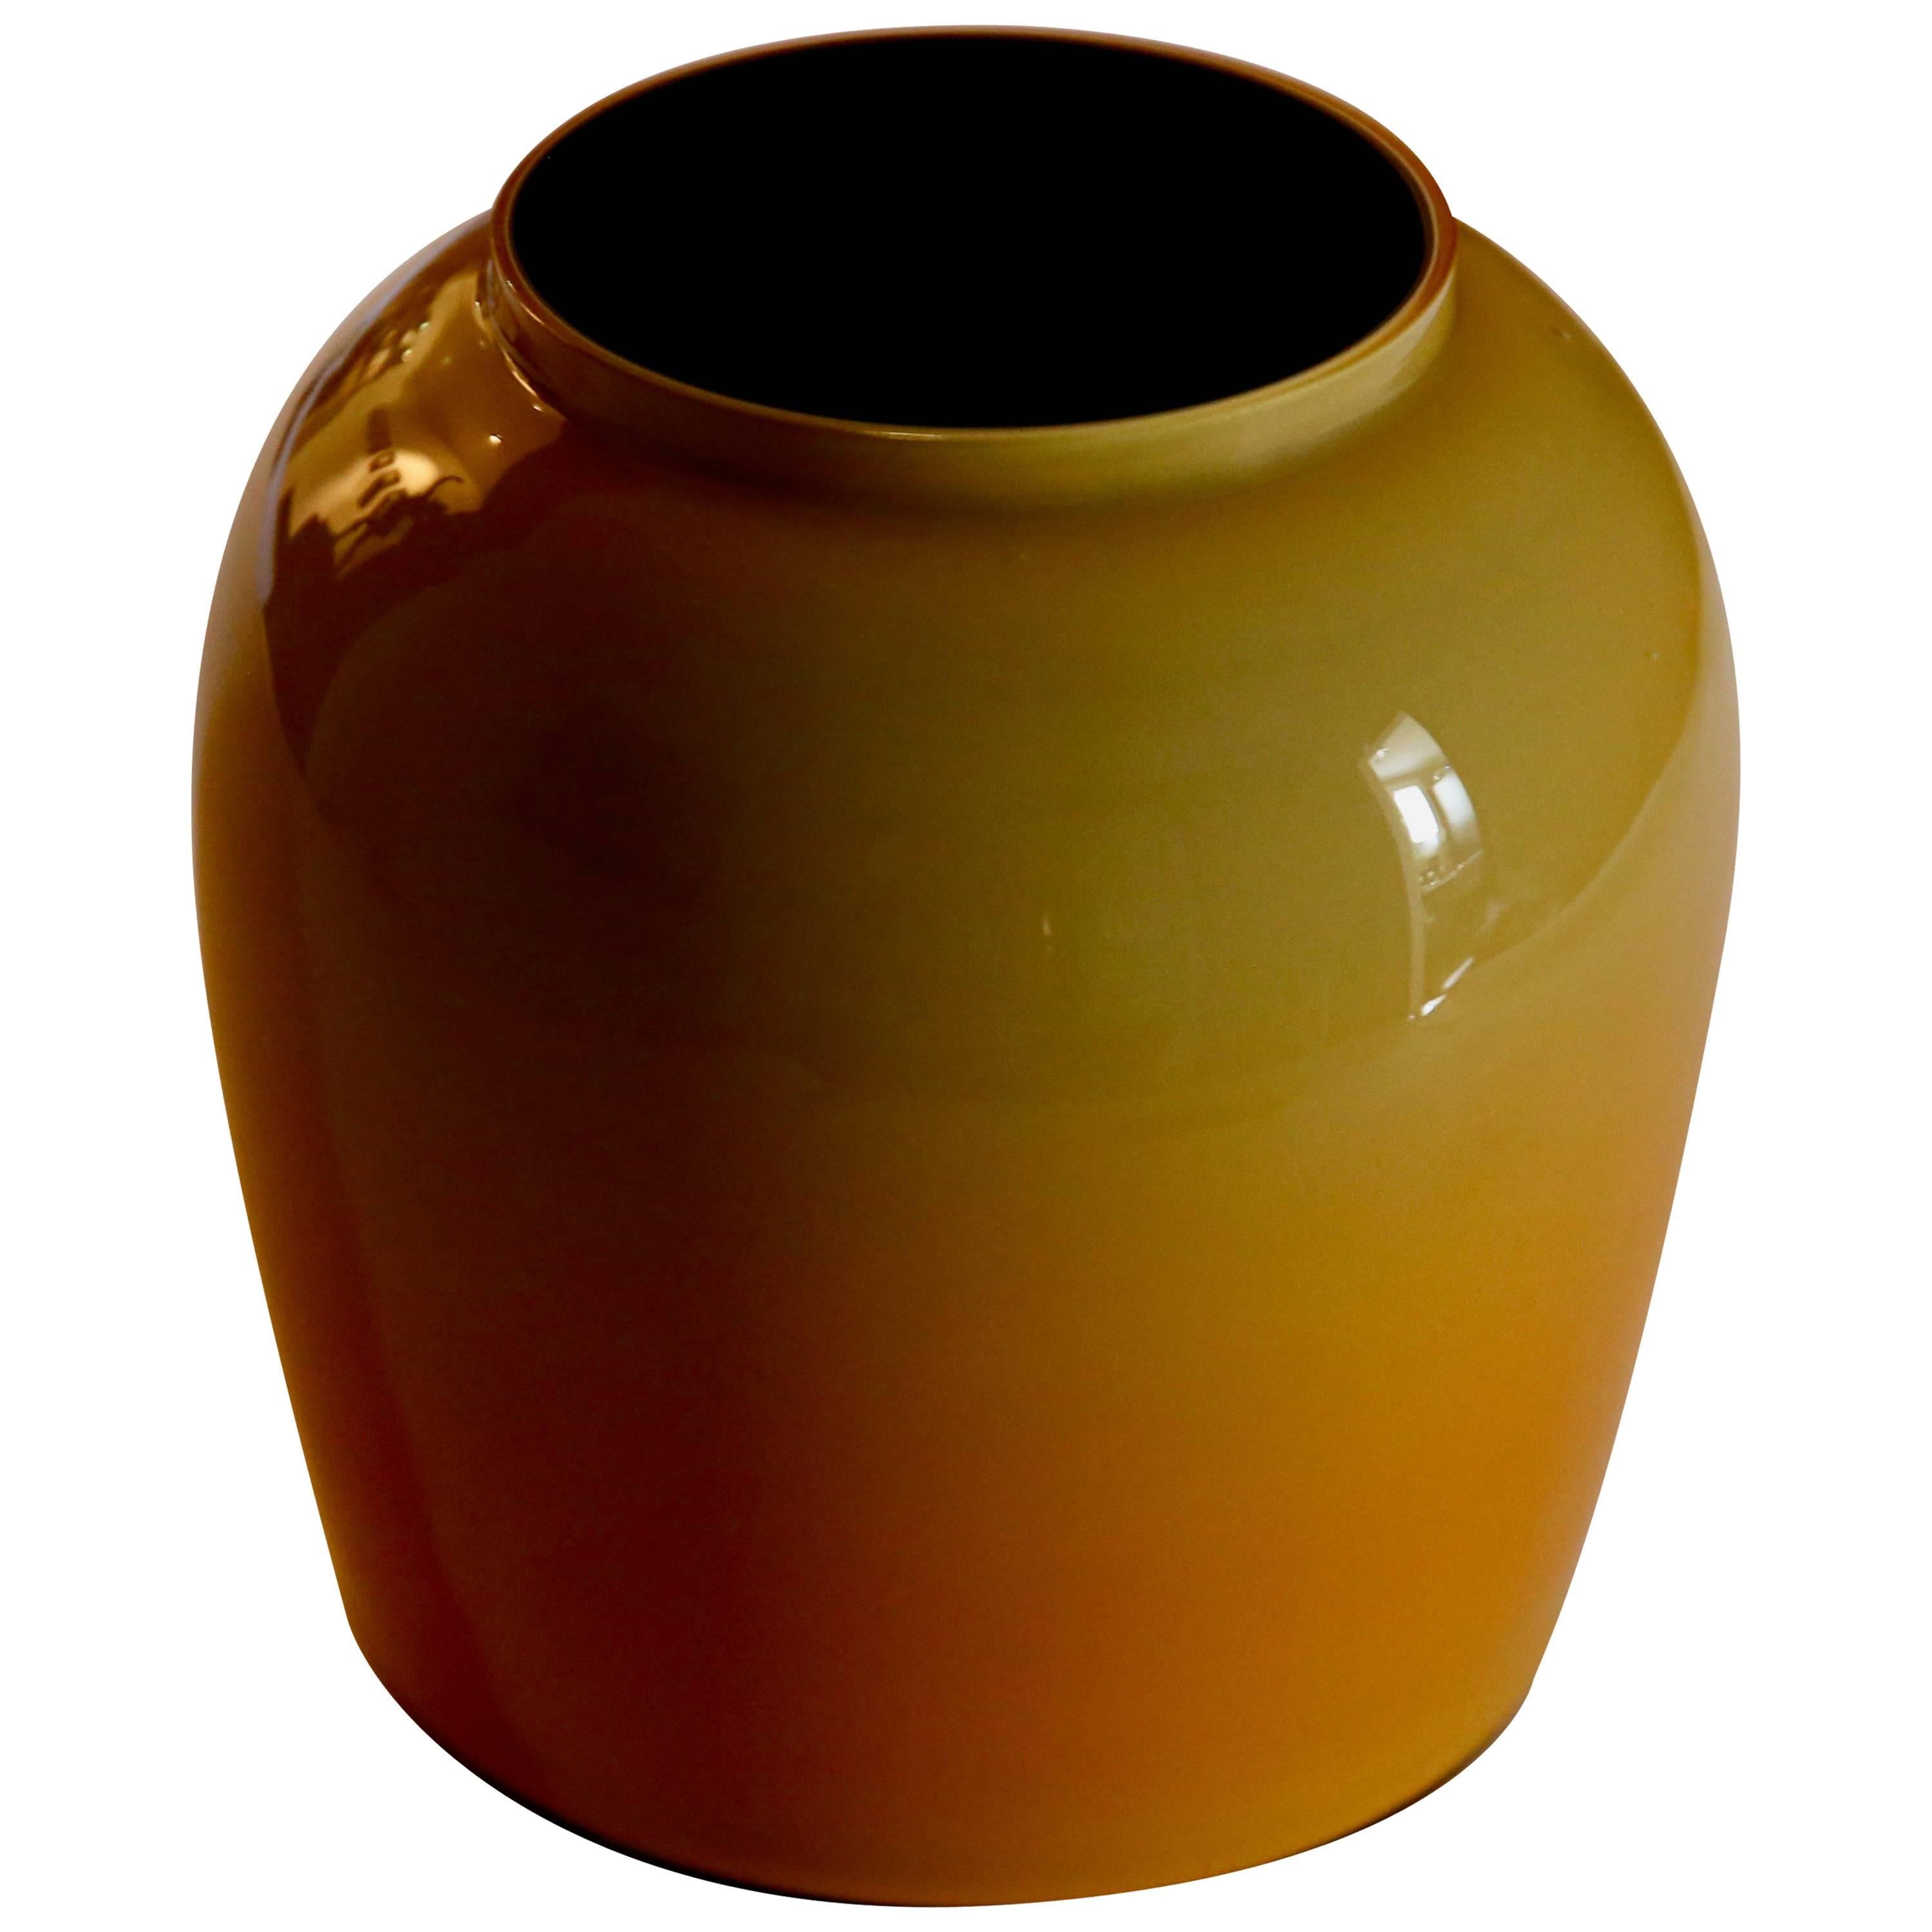 Venini ochre-yellow vase in excellent condition.
Beautiful color gradation between the more dark and light yellow tones.
 